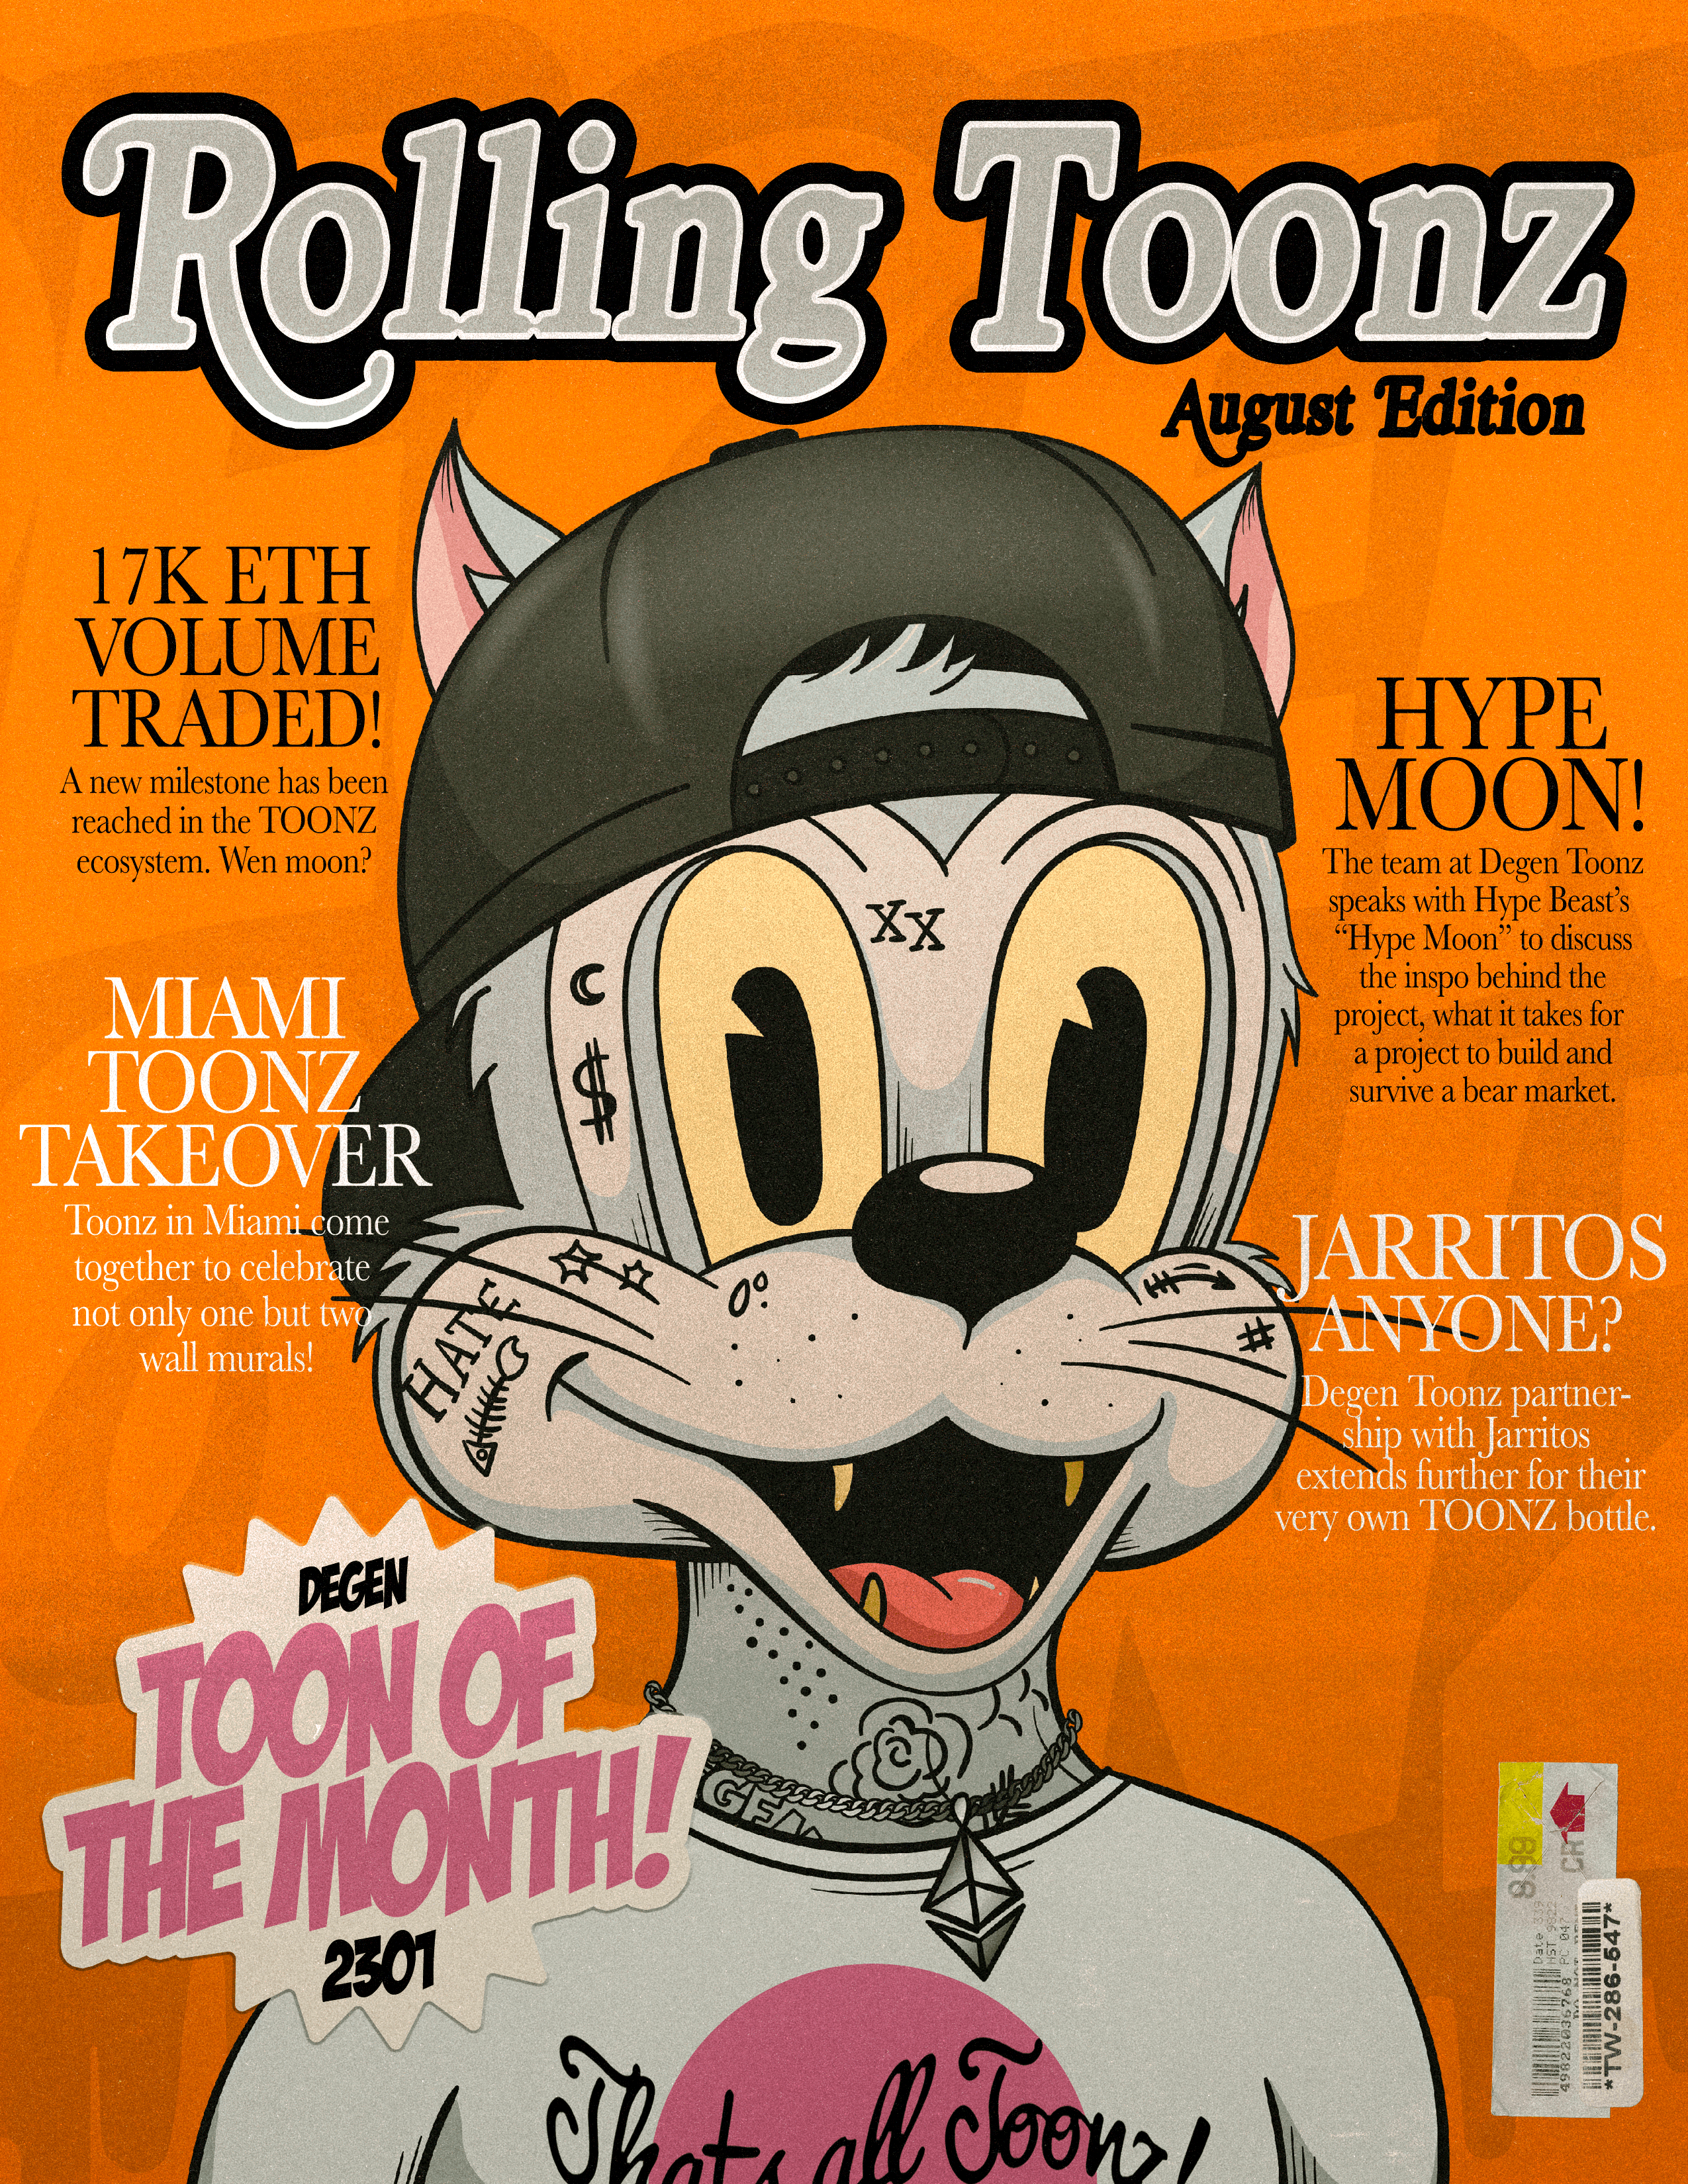 Rolling Toonz - August Edition